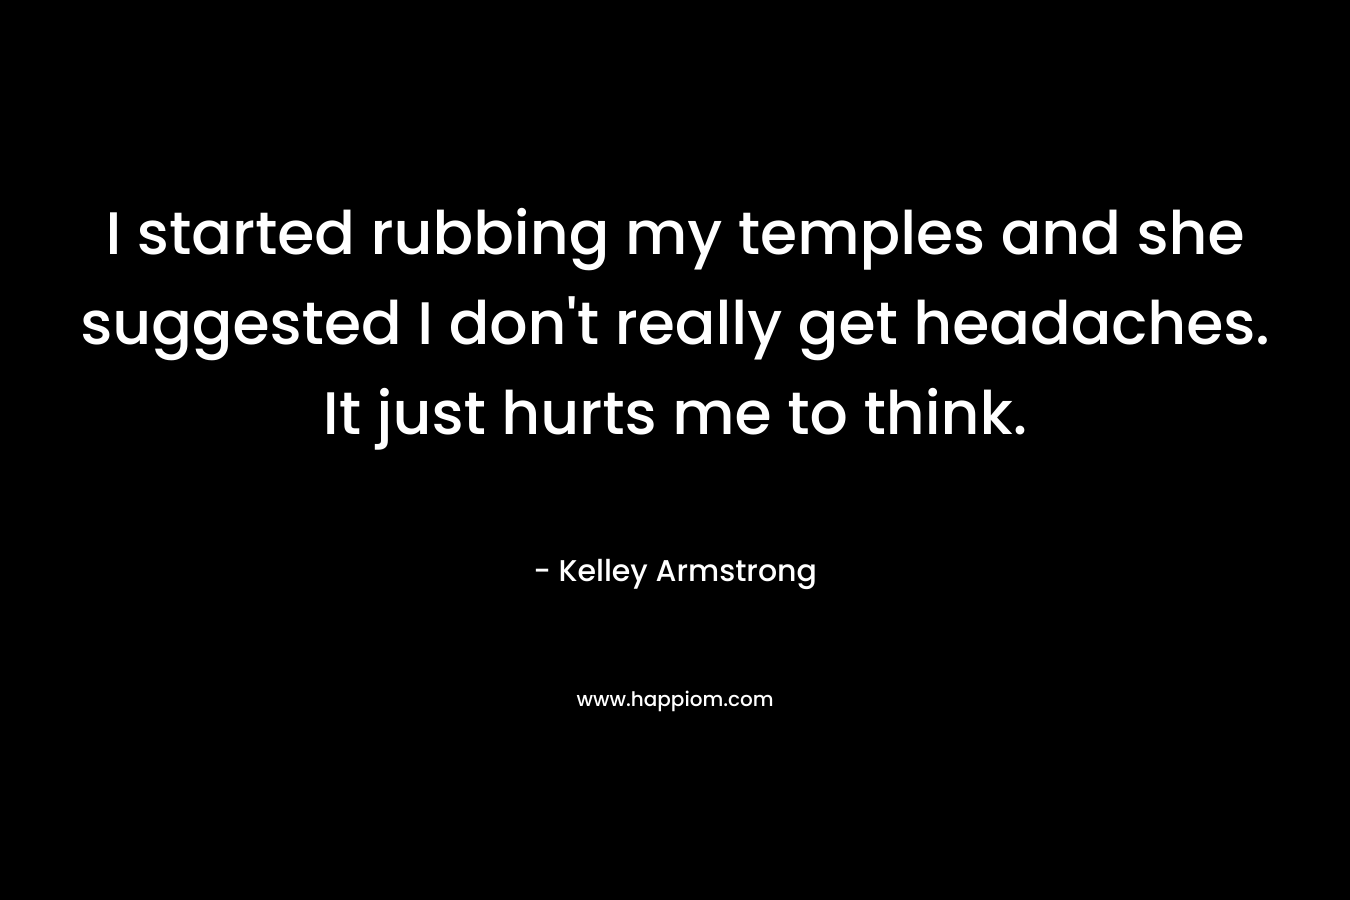 I started rubbing my temples and she suggested I don’t really get headaches. It just hurts me to think. – Kelley Armstrong